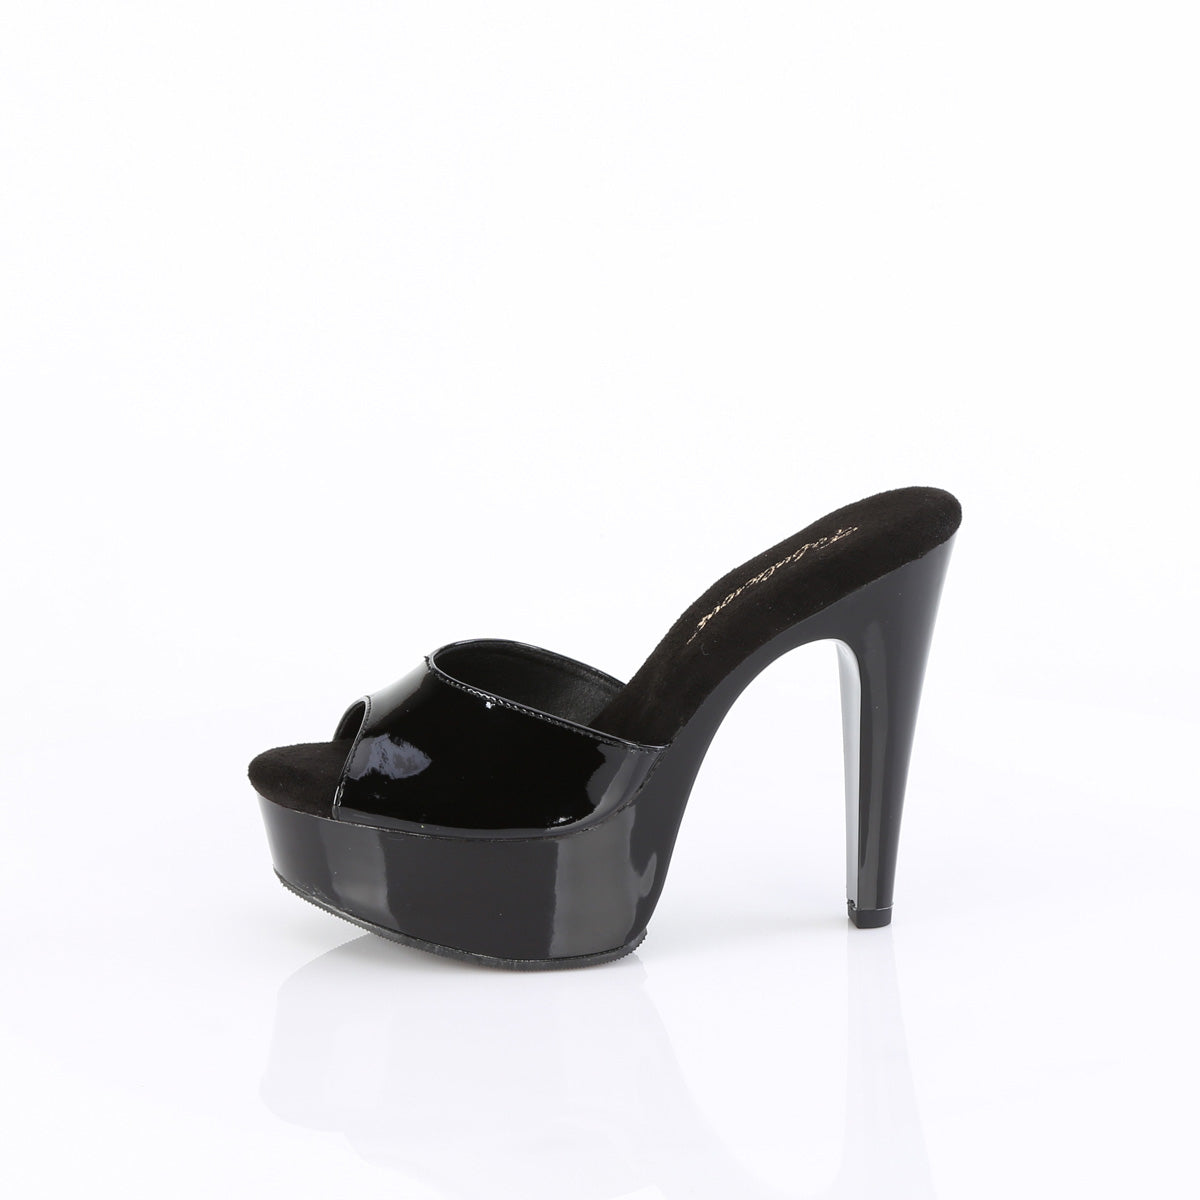 MARTINI-501 Fabulicious Black Patent Shoes [Sexy Shoes]